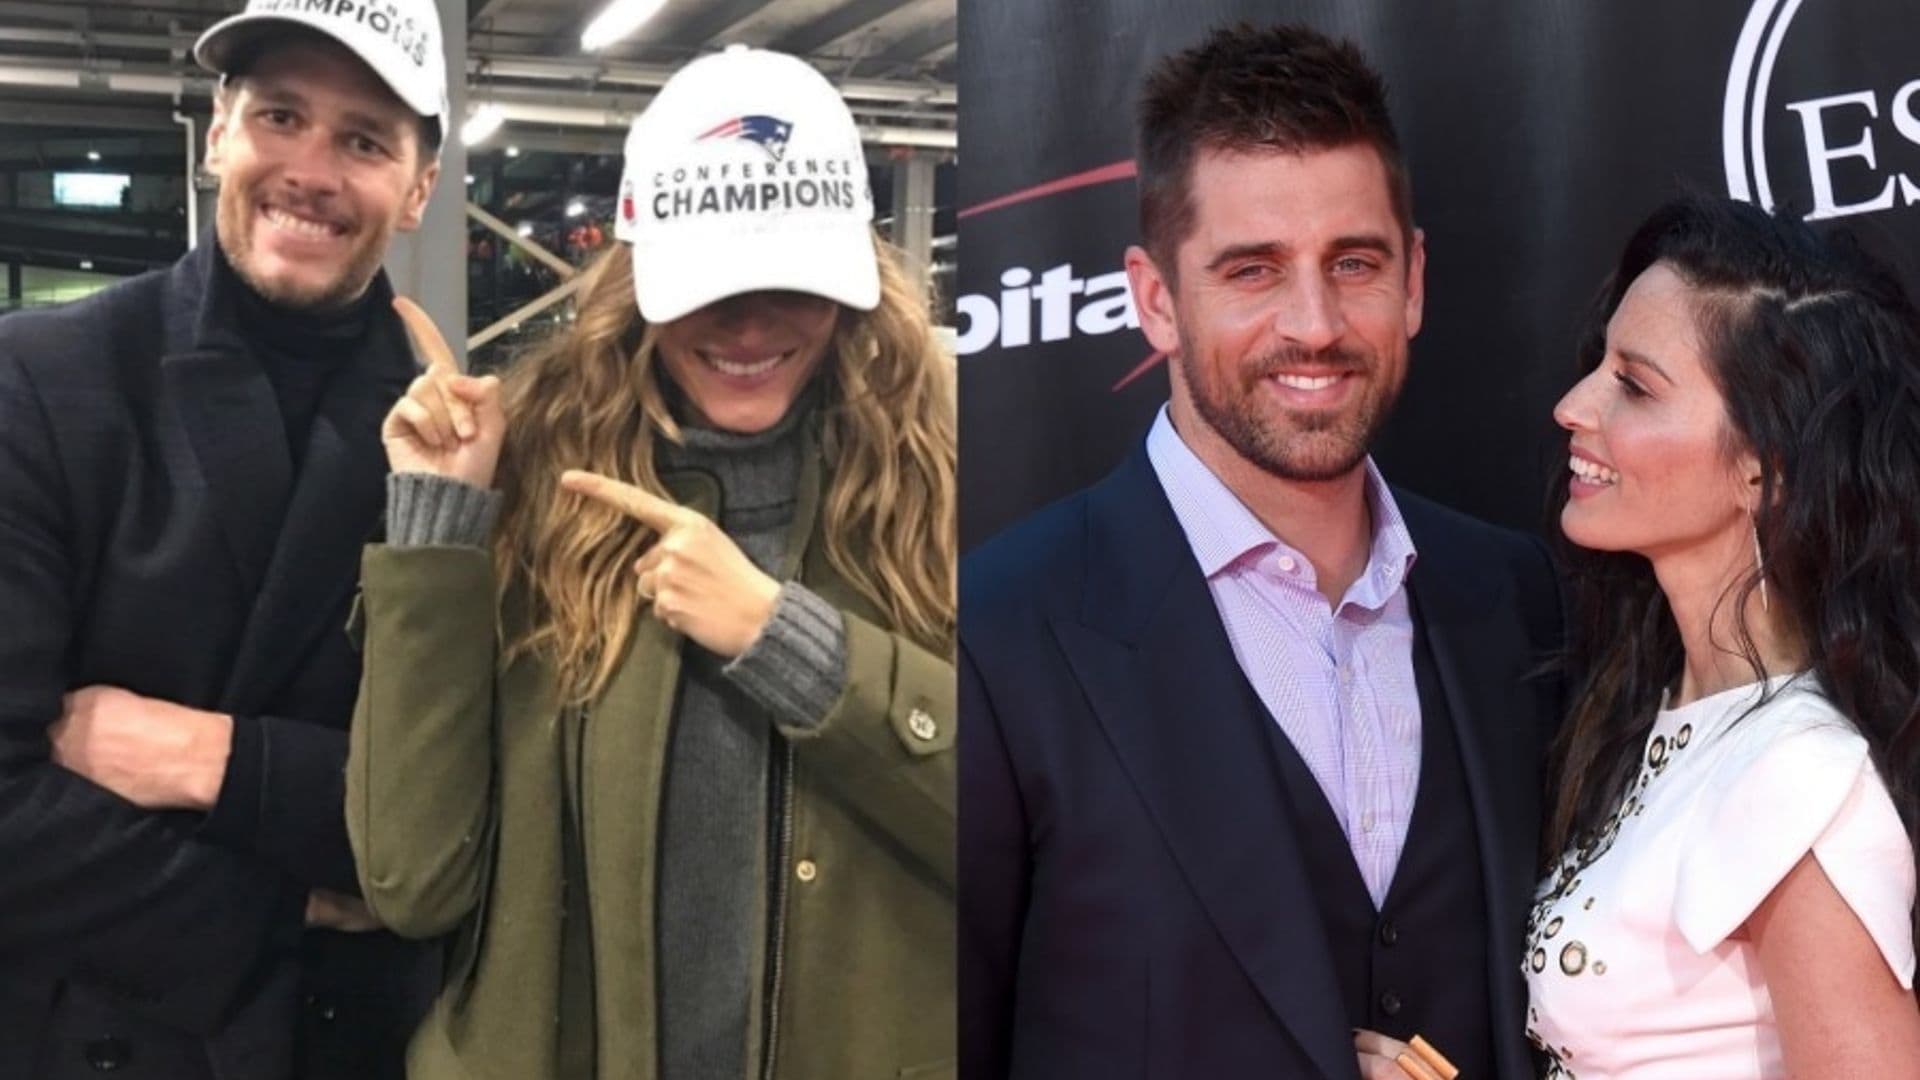 Gisele Bundchen congratulates Tom Brady after win while Olivia Munn consoles Aaron Rodgers after loss